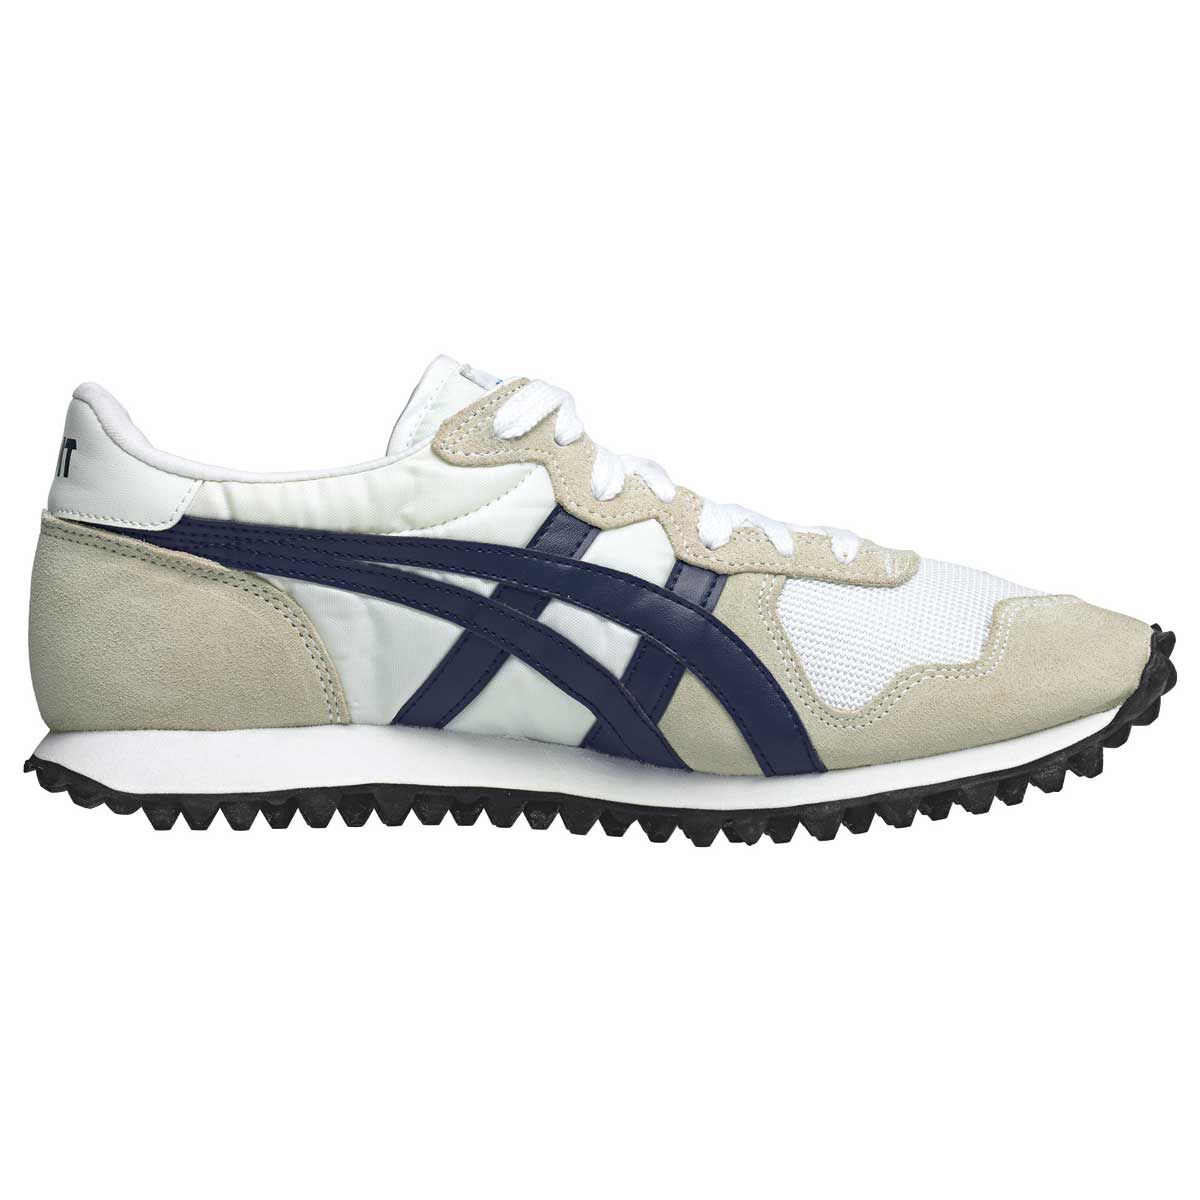 asics tiger touch shoes, OFF 75%,Buy!